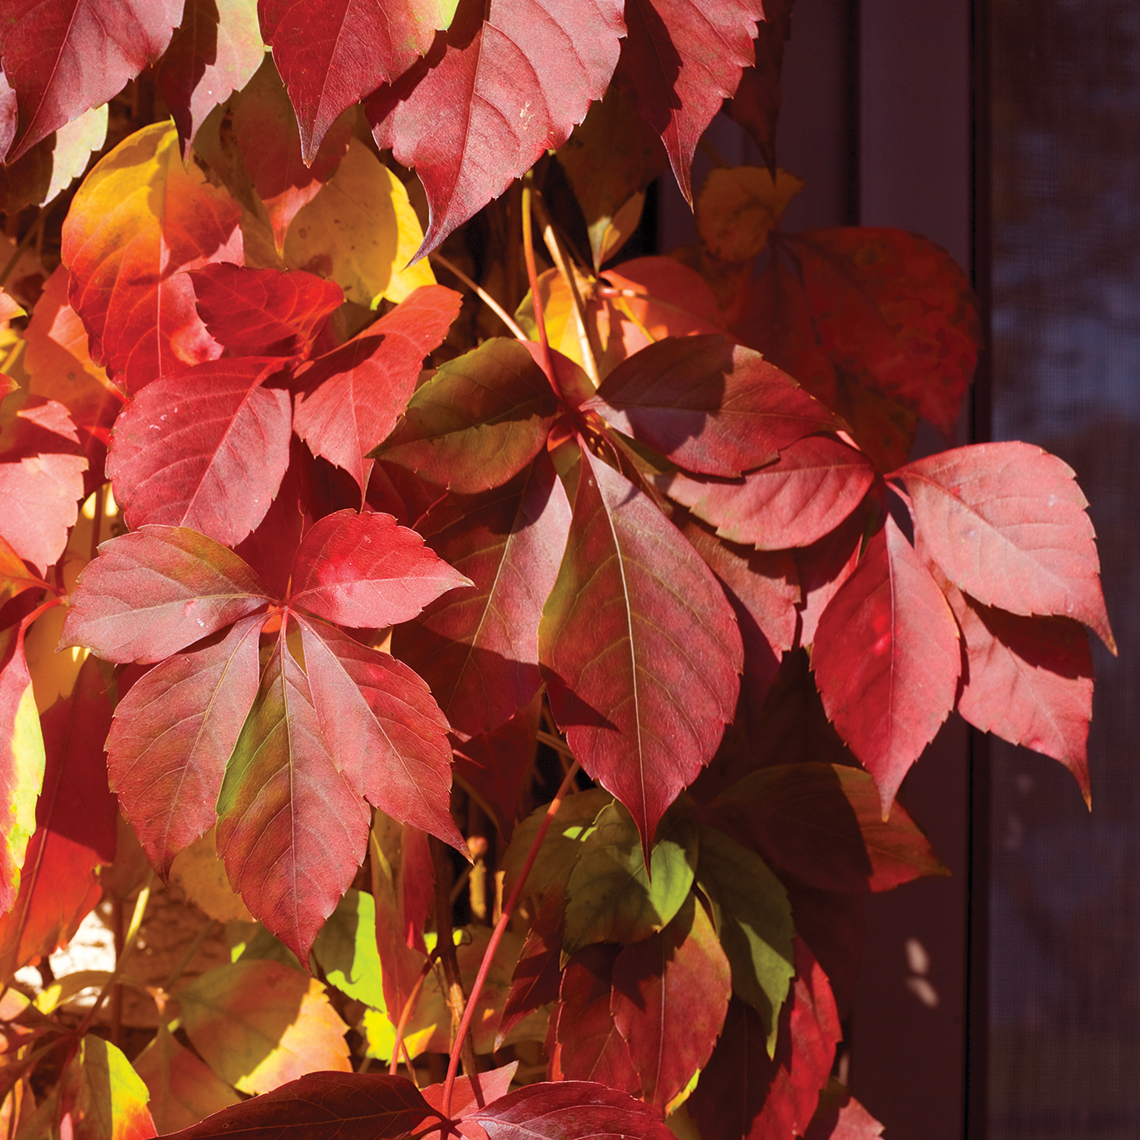 Close up of red and yellow Red Wall Parthenocissus foliage